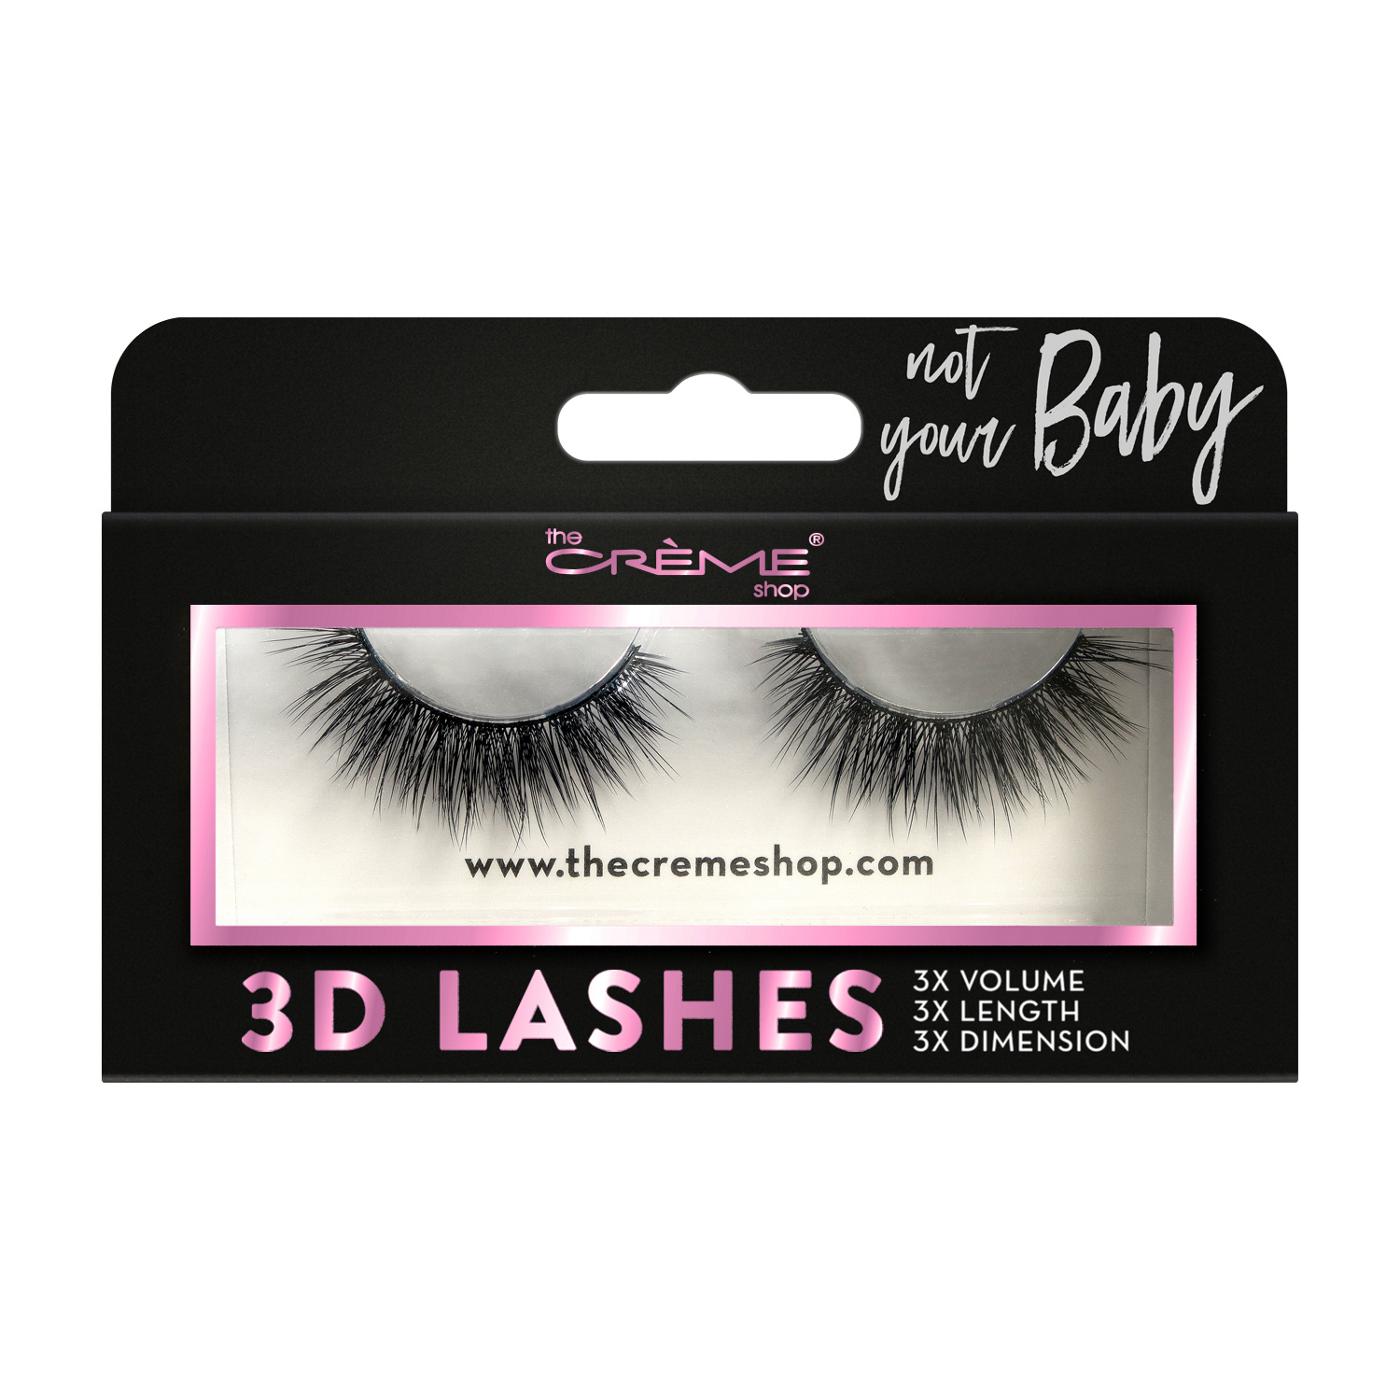 Essential Faux Mink Deluxe 3D Lashes Tabletop Display Set B, 108